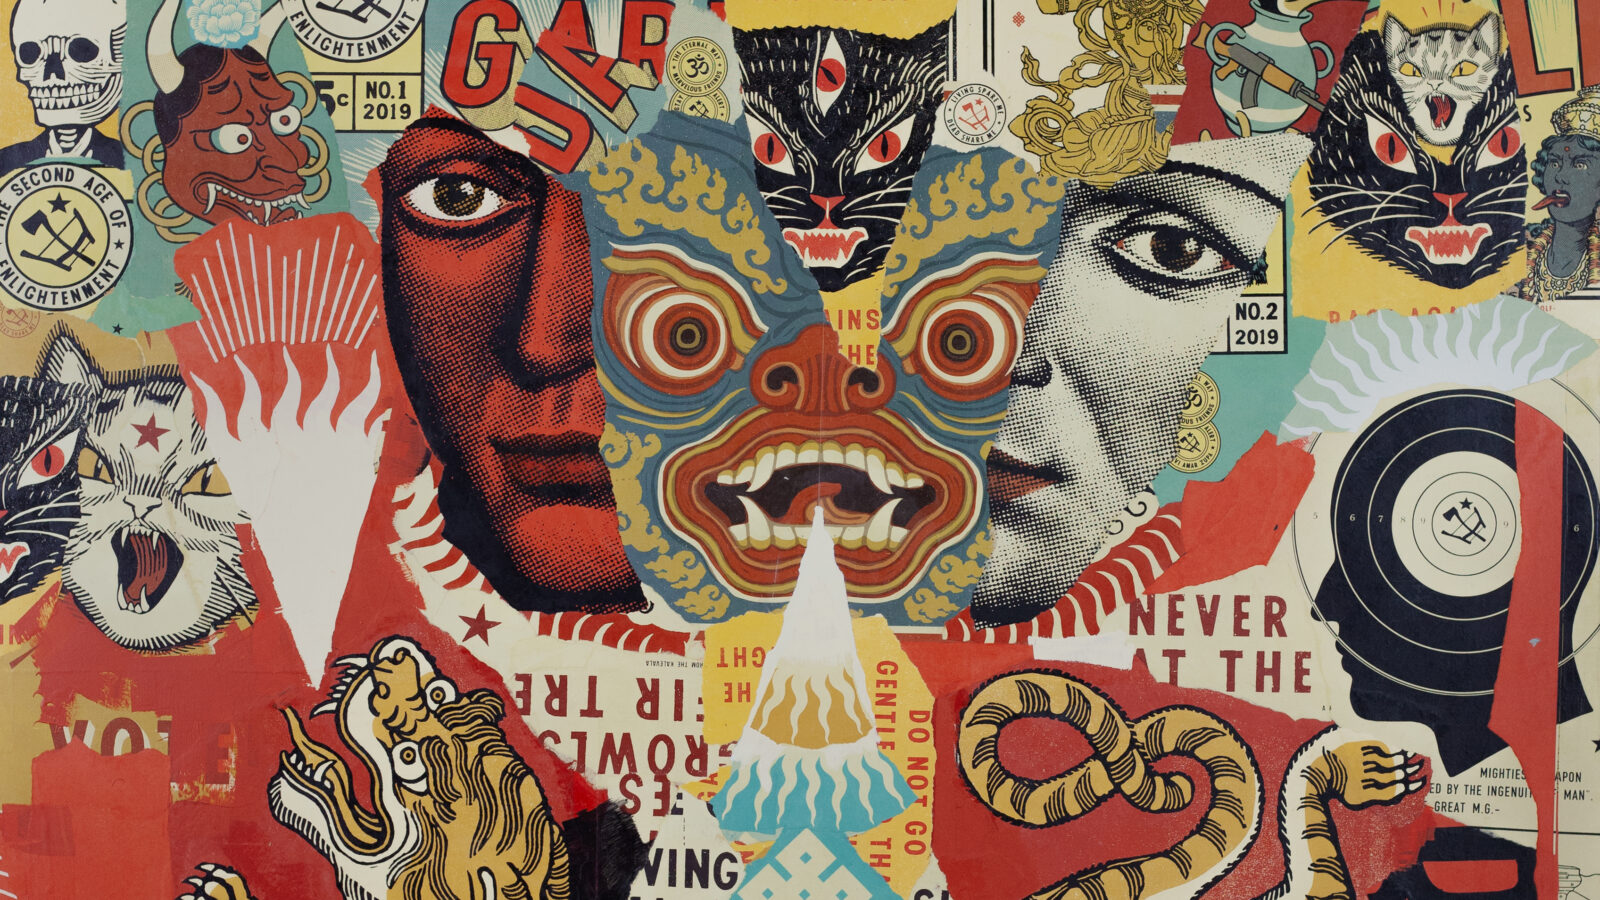 Featured image for “Subliminal Project Presents: “These Five Kings” Featuring Art By Ravi Zupa”